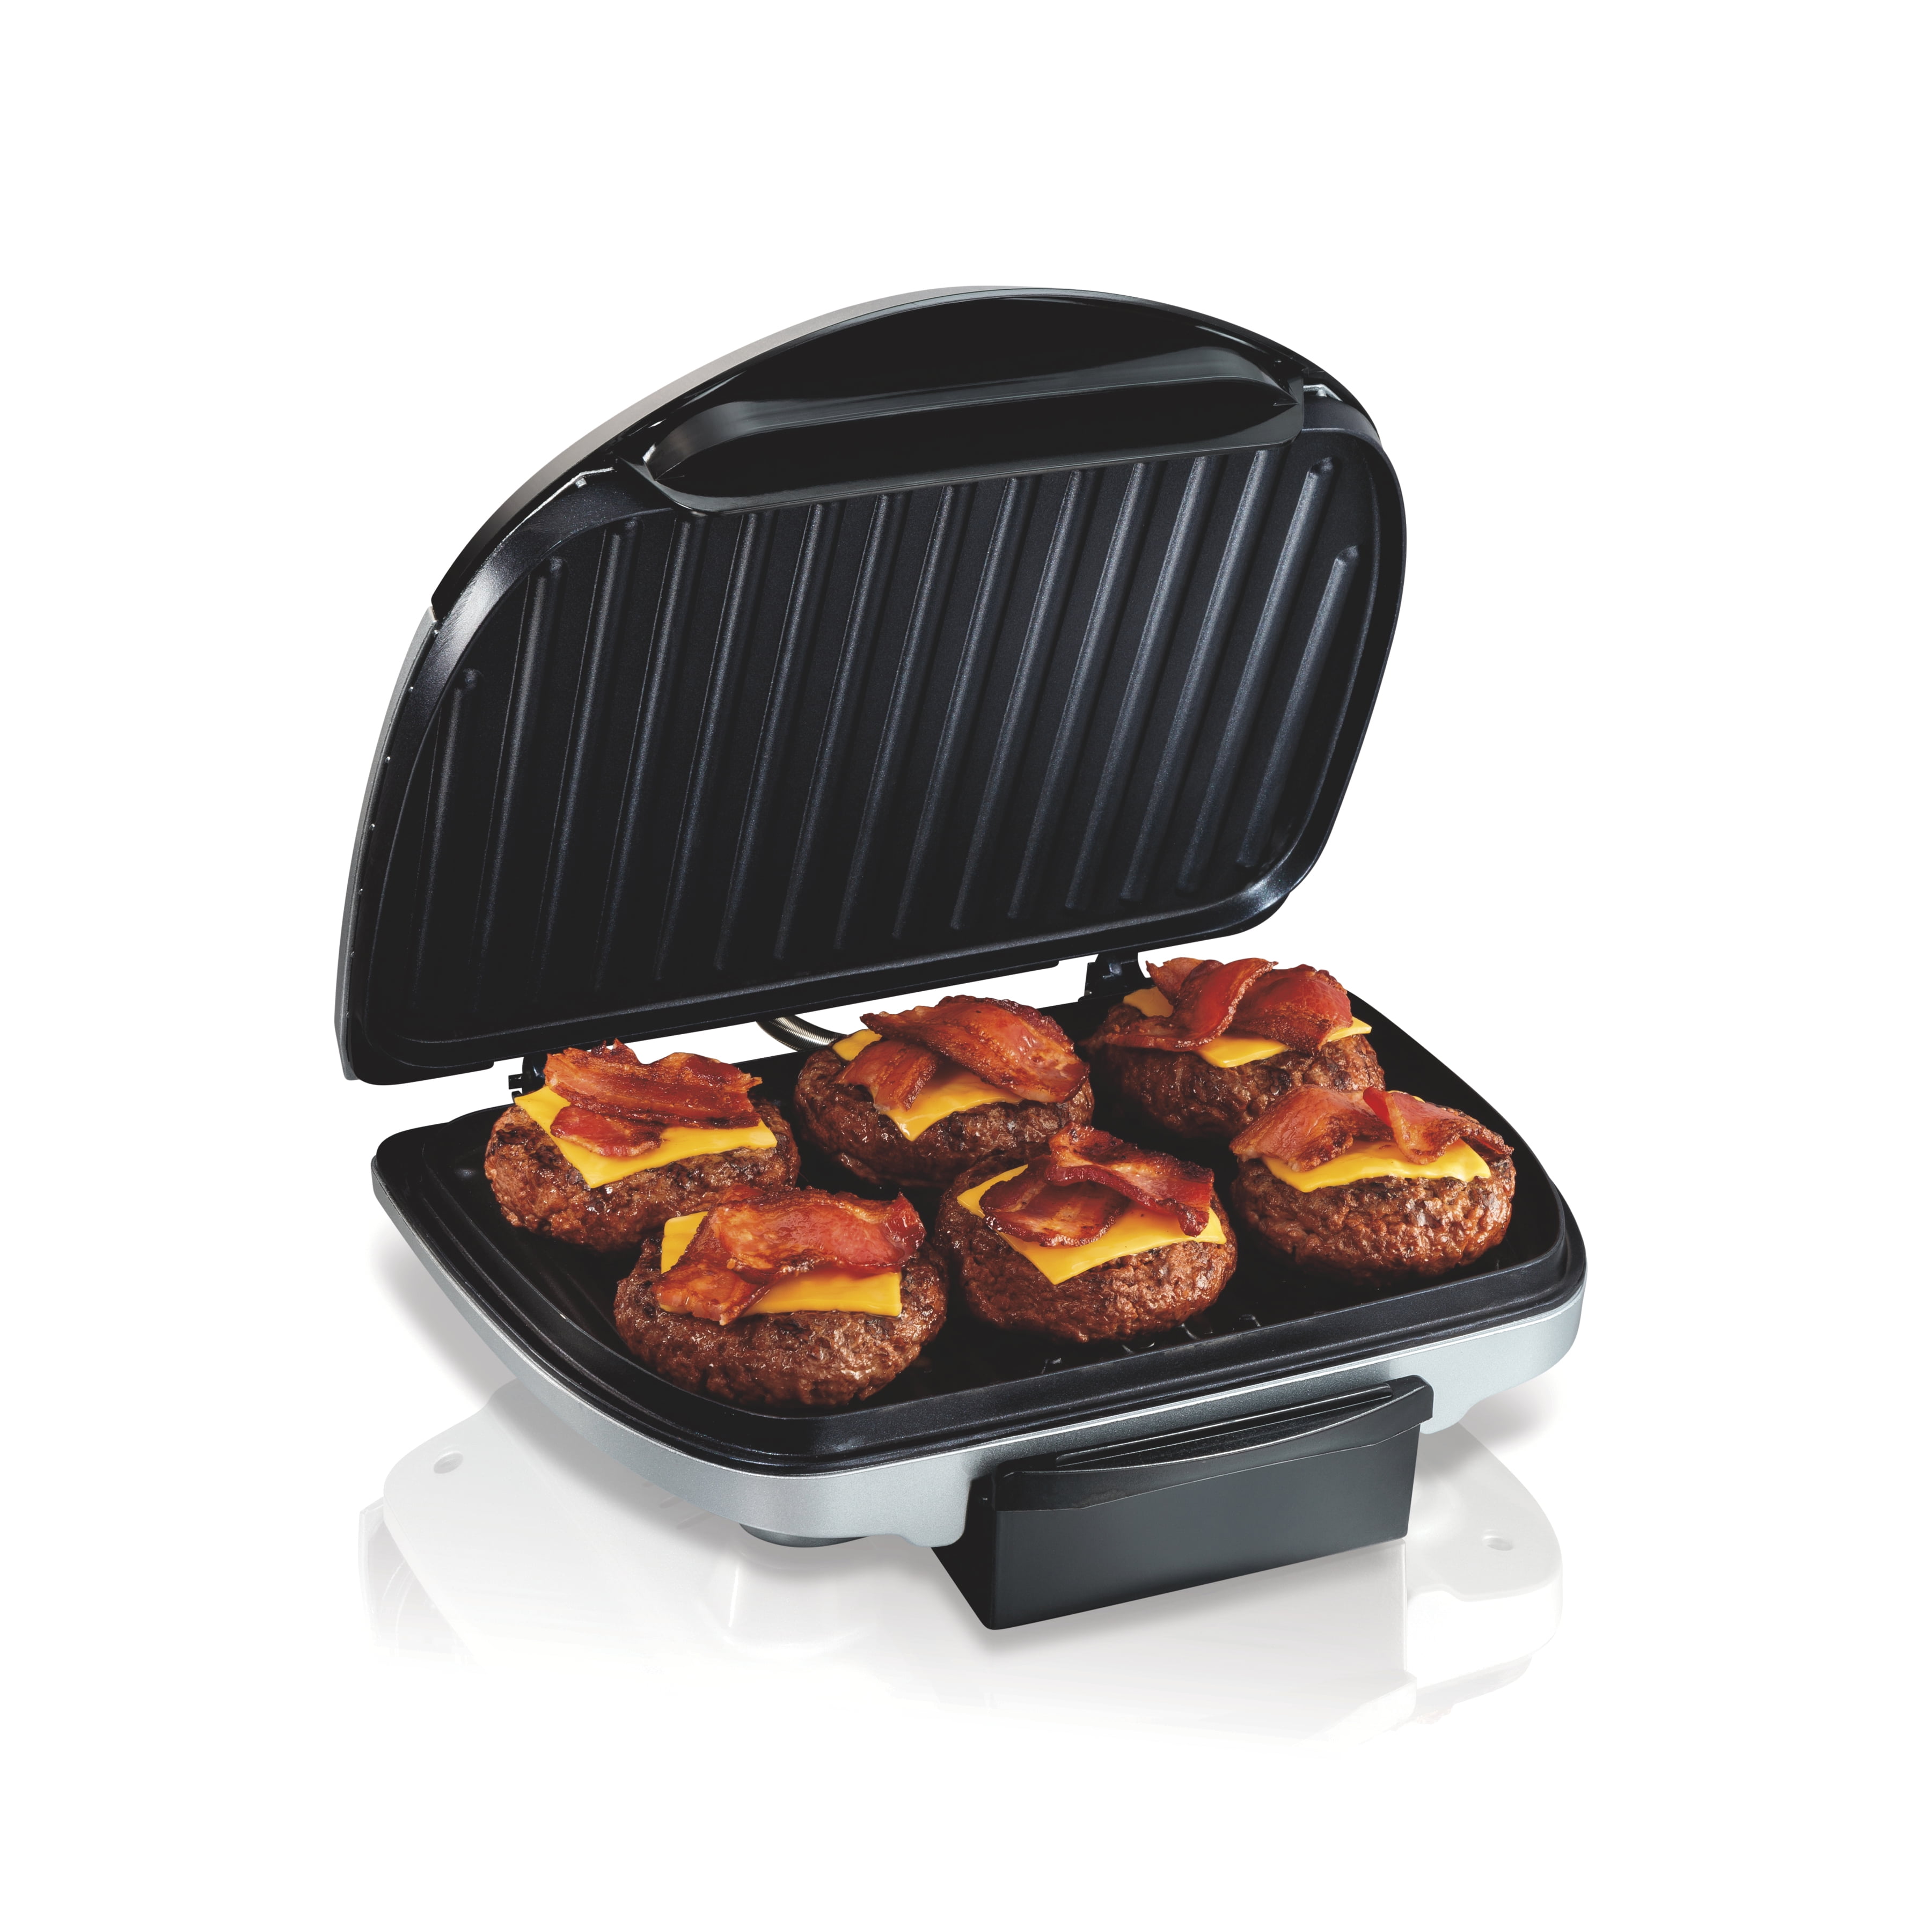 Hamilton Beach Indoor Grill Electric Griddle Combo&Bacon Cooker Nonstick  Griddle